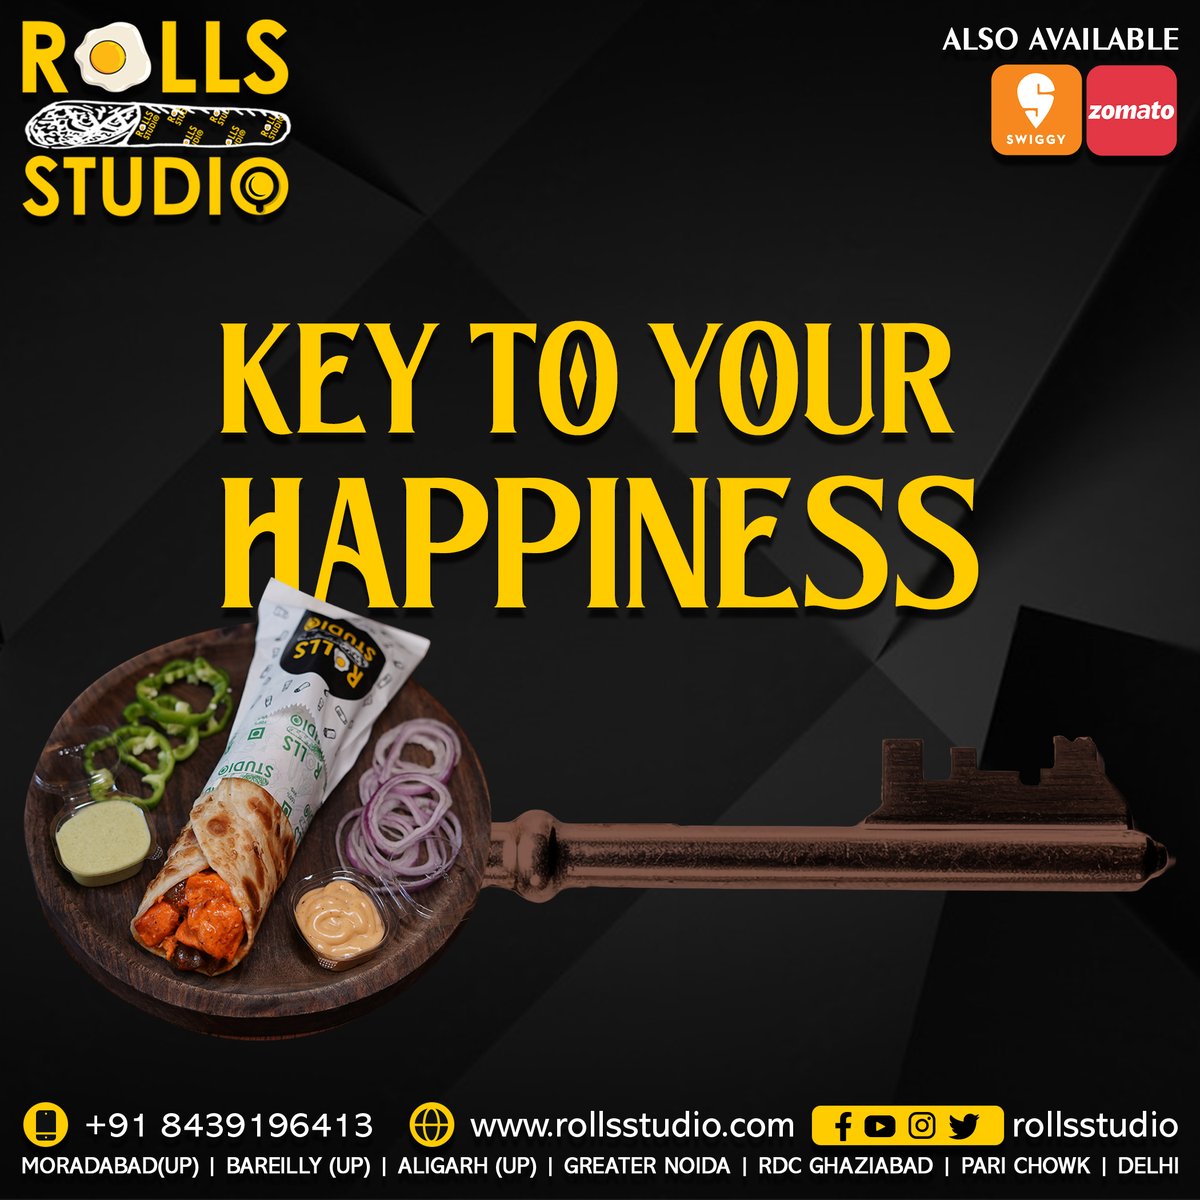 Find your secret to happiness at Rolls Studio. We serve delicious and delectable rolls.
.
.
Order Online at Zomato & Swiggy Follow @rollsstudioofficial
.
.
#RollsStudio #BestRolls #YummyBites #TasteOfAligarh #RollingDelights #SatisfyingSnacks #FoodieFinds #DeliciousEats